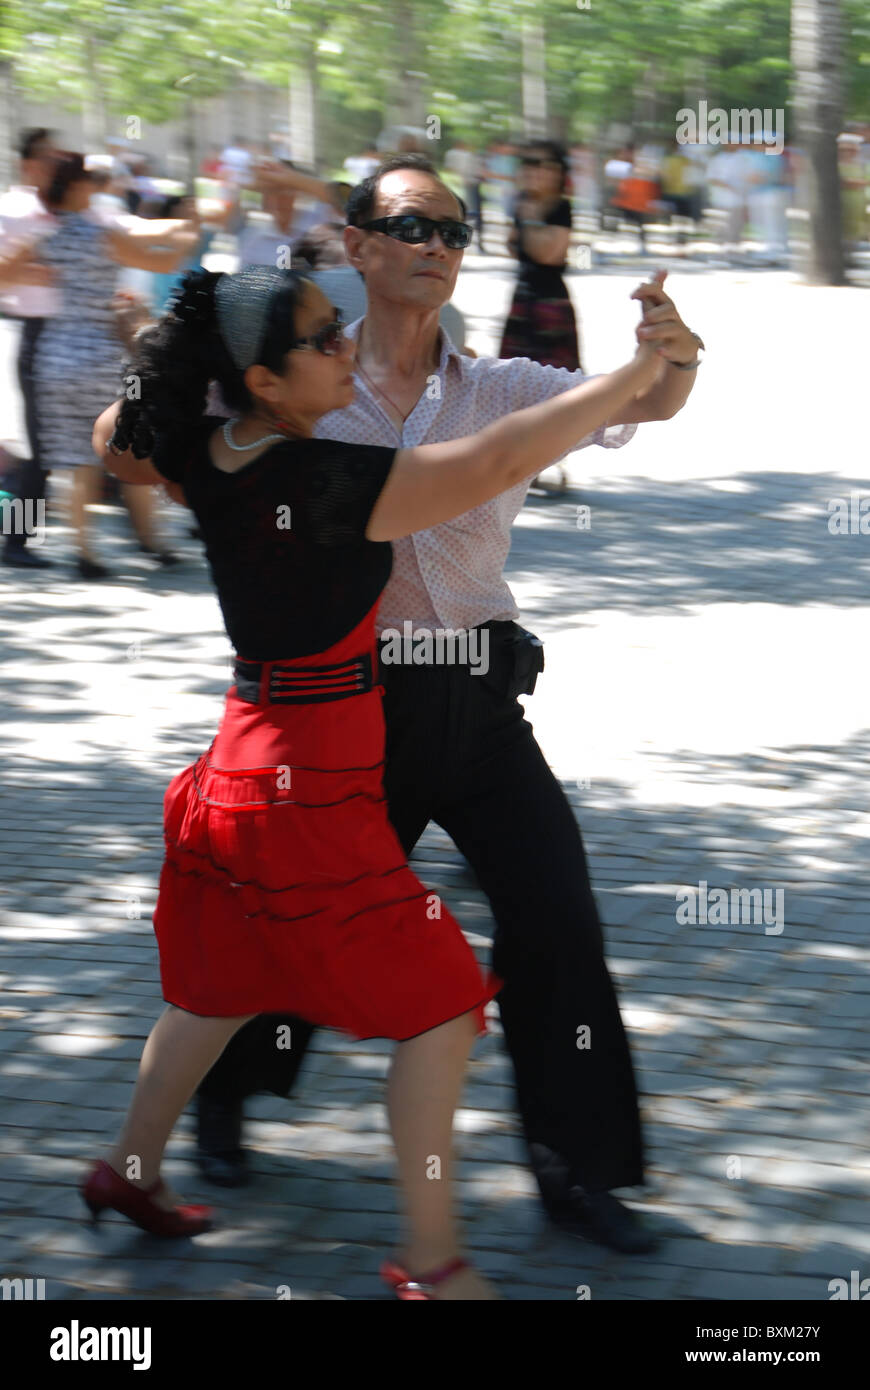 Music, Dance, Performance, Outdoor, Temple of Heaven Park, Beijing, China Stock Photo